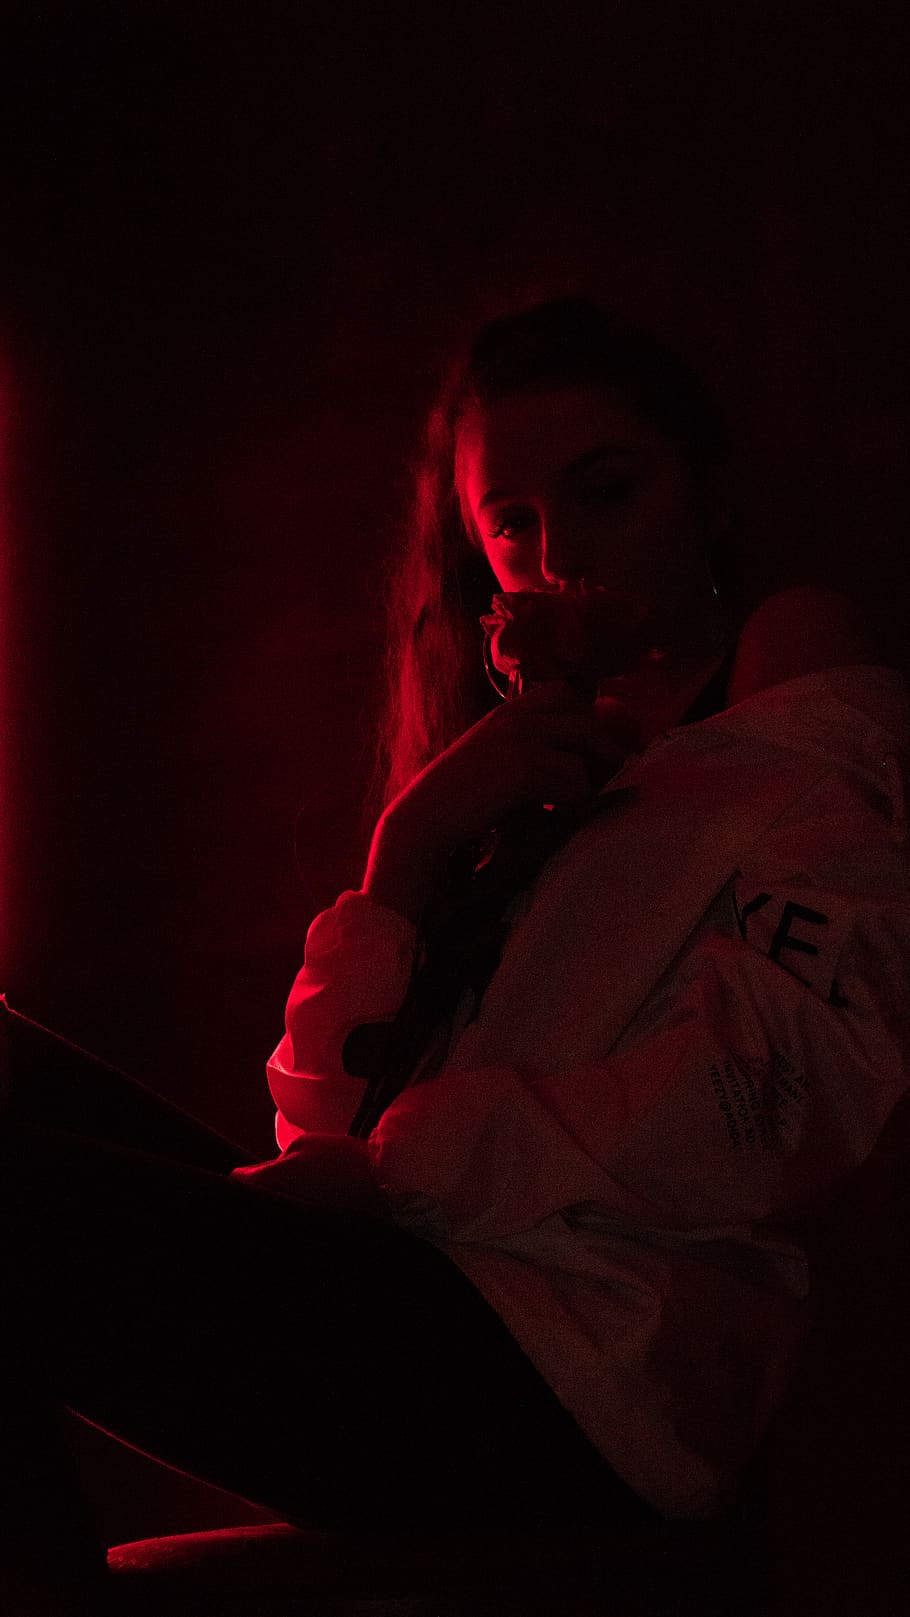 A woman in a white jacket sits in a dark room with red light - Neon red